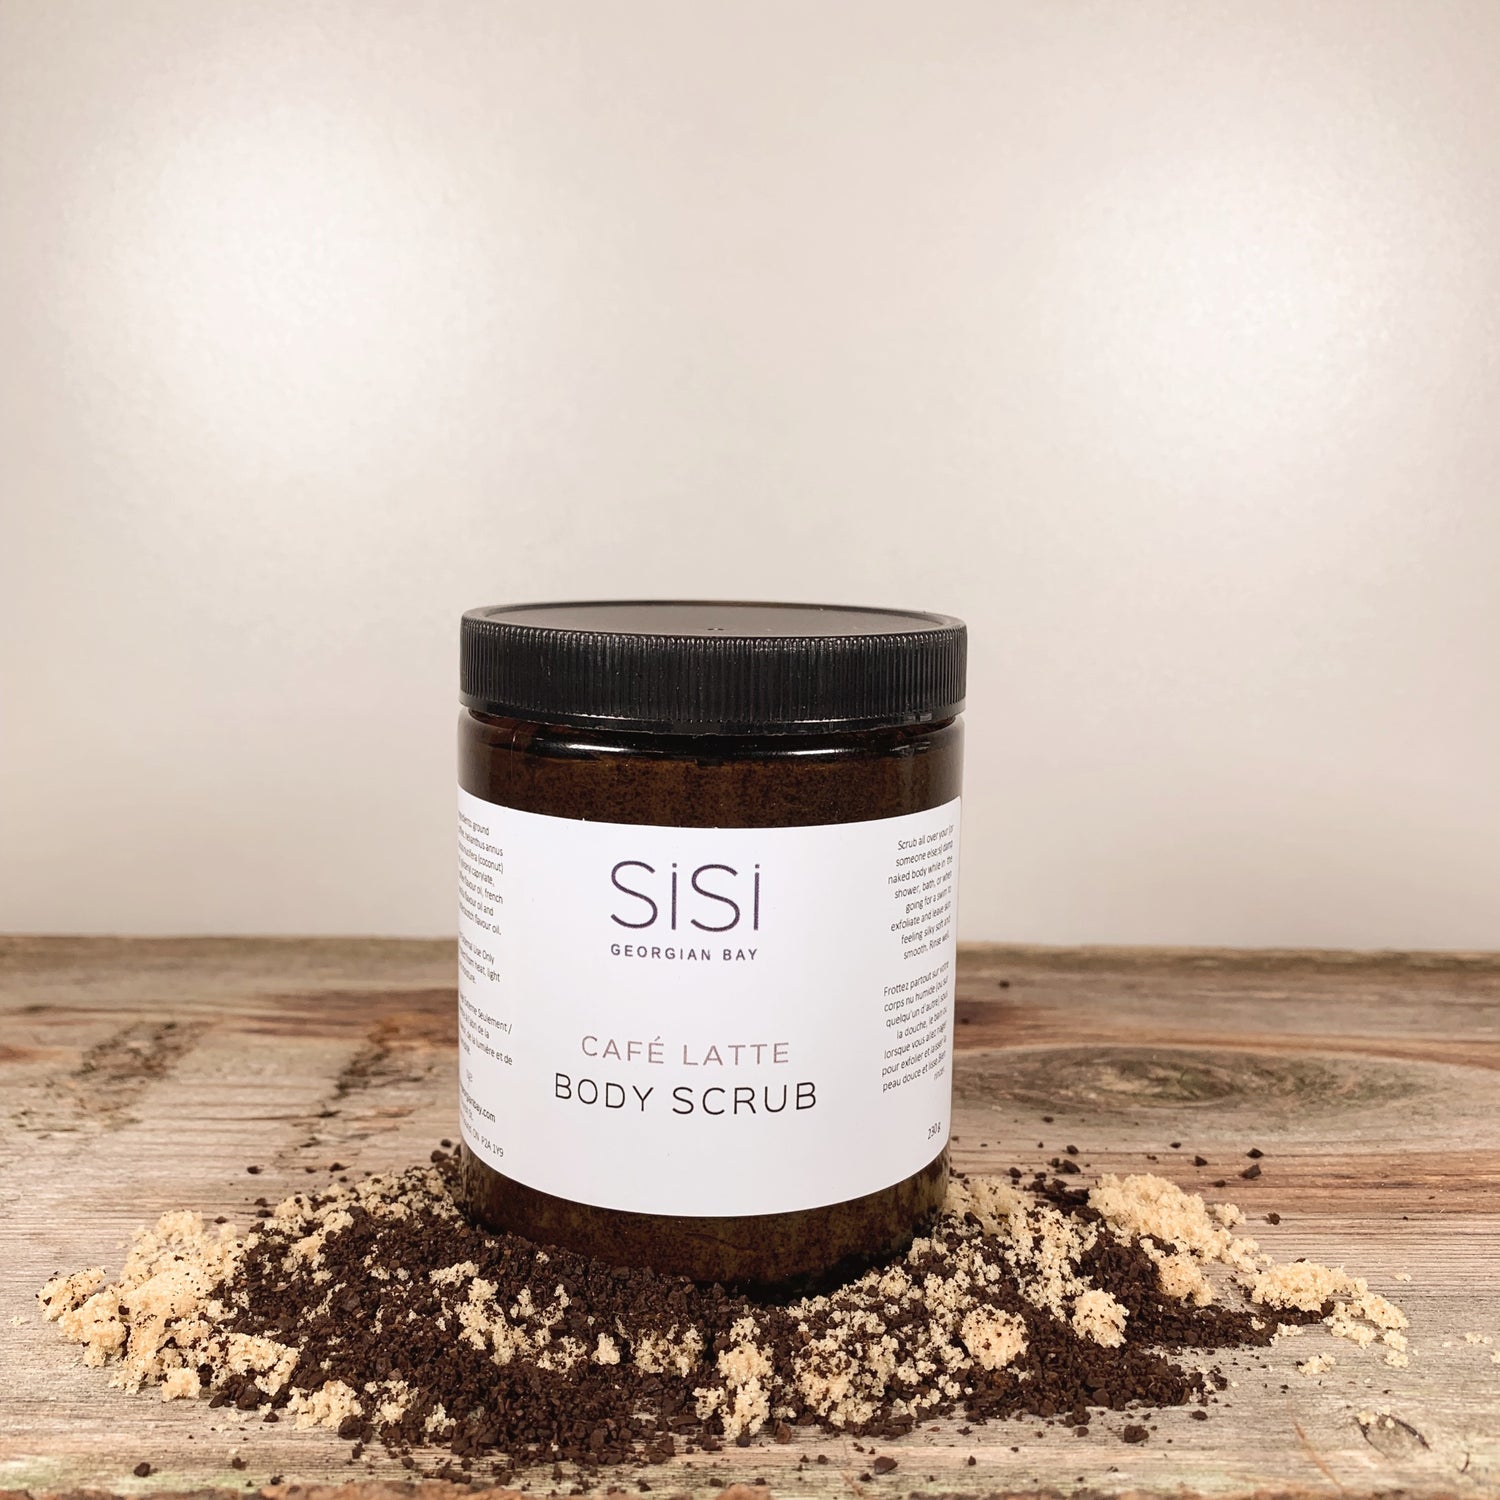 a jar of sisi georgian bay cafe latte coffee body scrub on a wooden counter with coffee grounds and brown sugar sprinkled around it